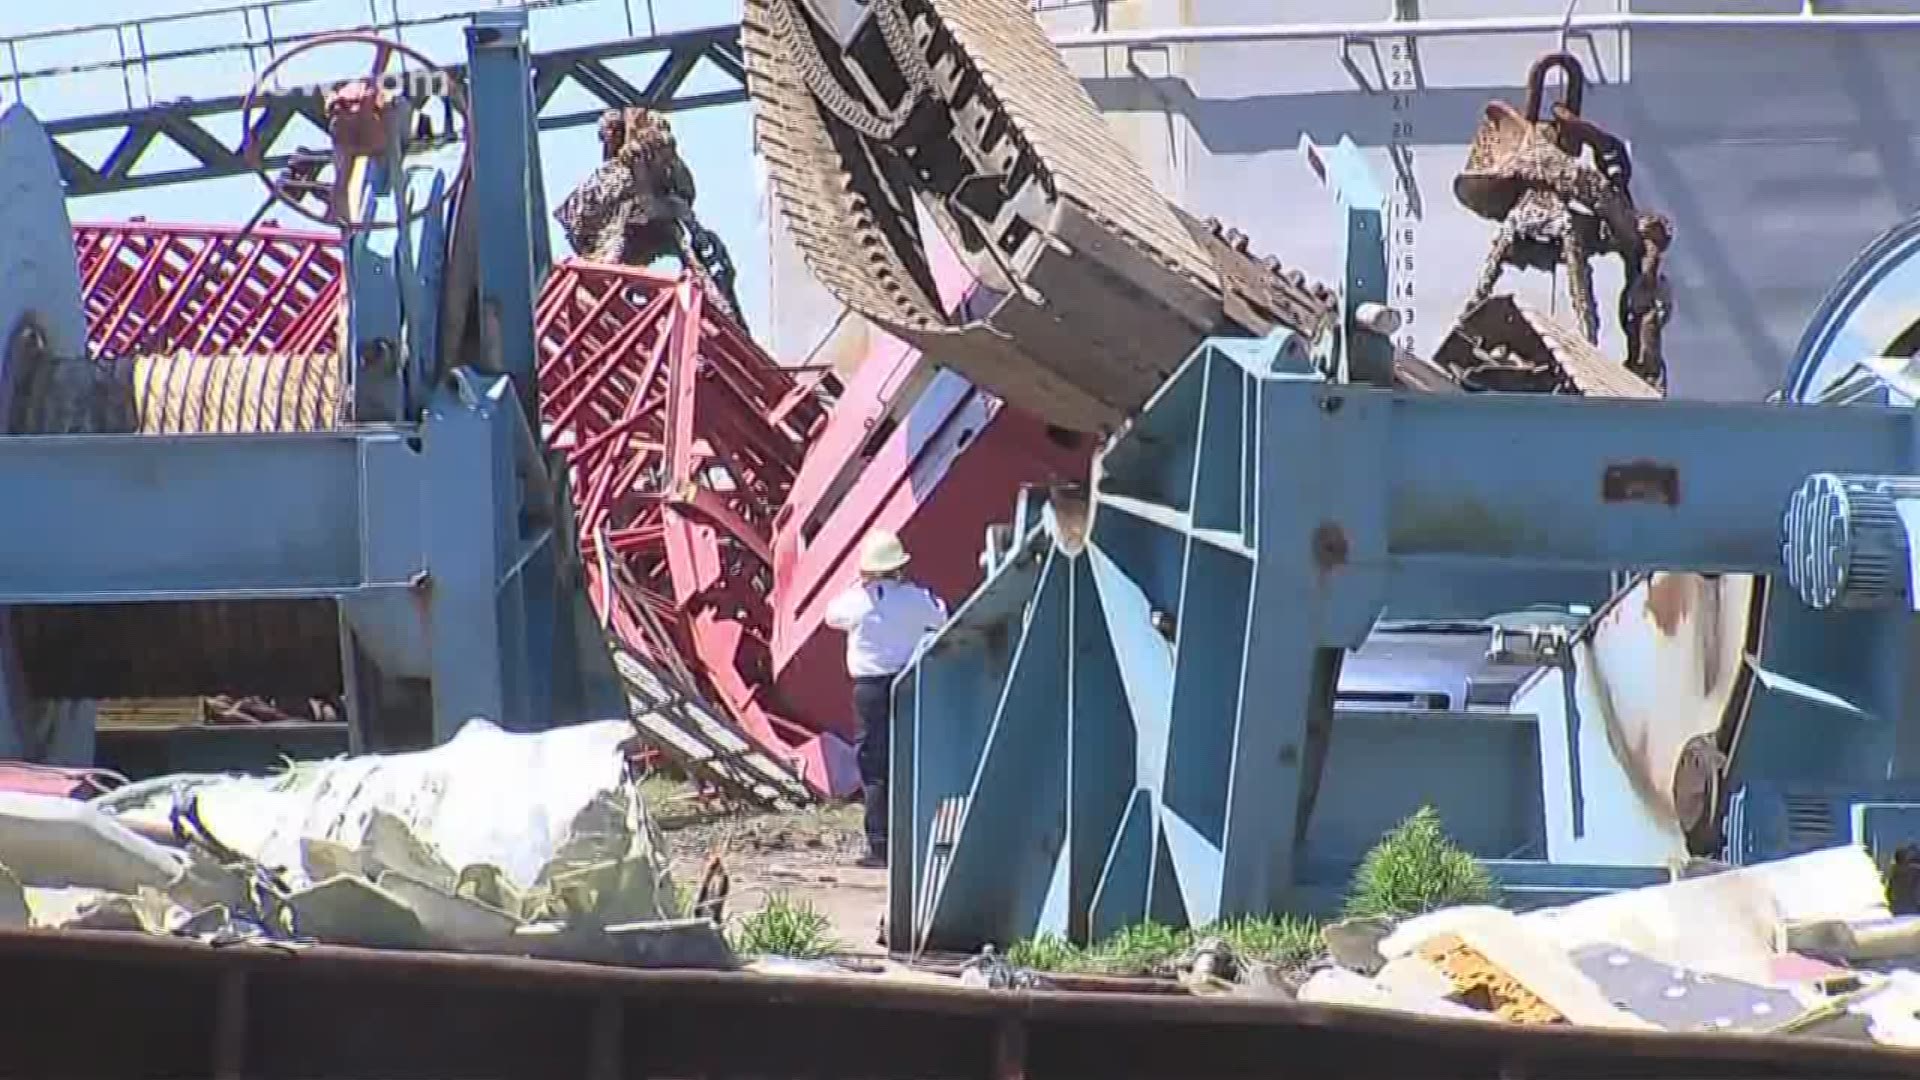 One injured after crane accident in Sabine Pass shipyard